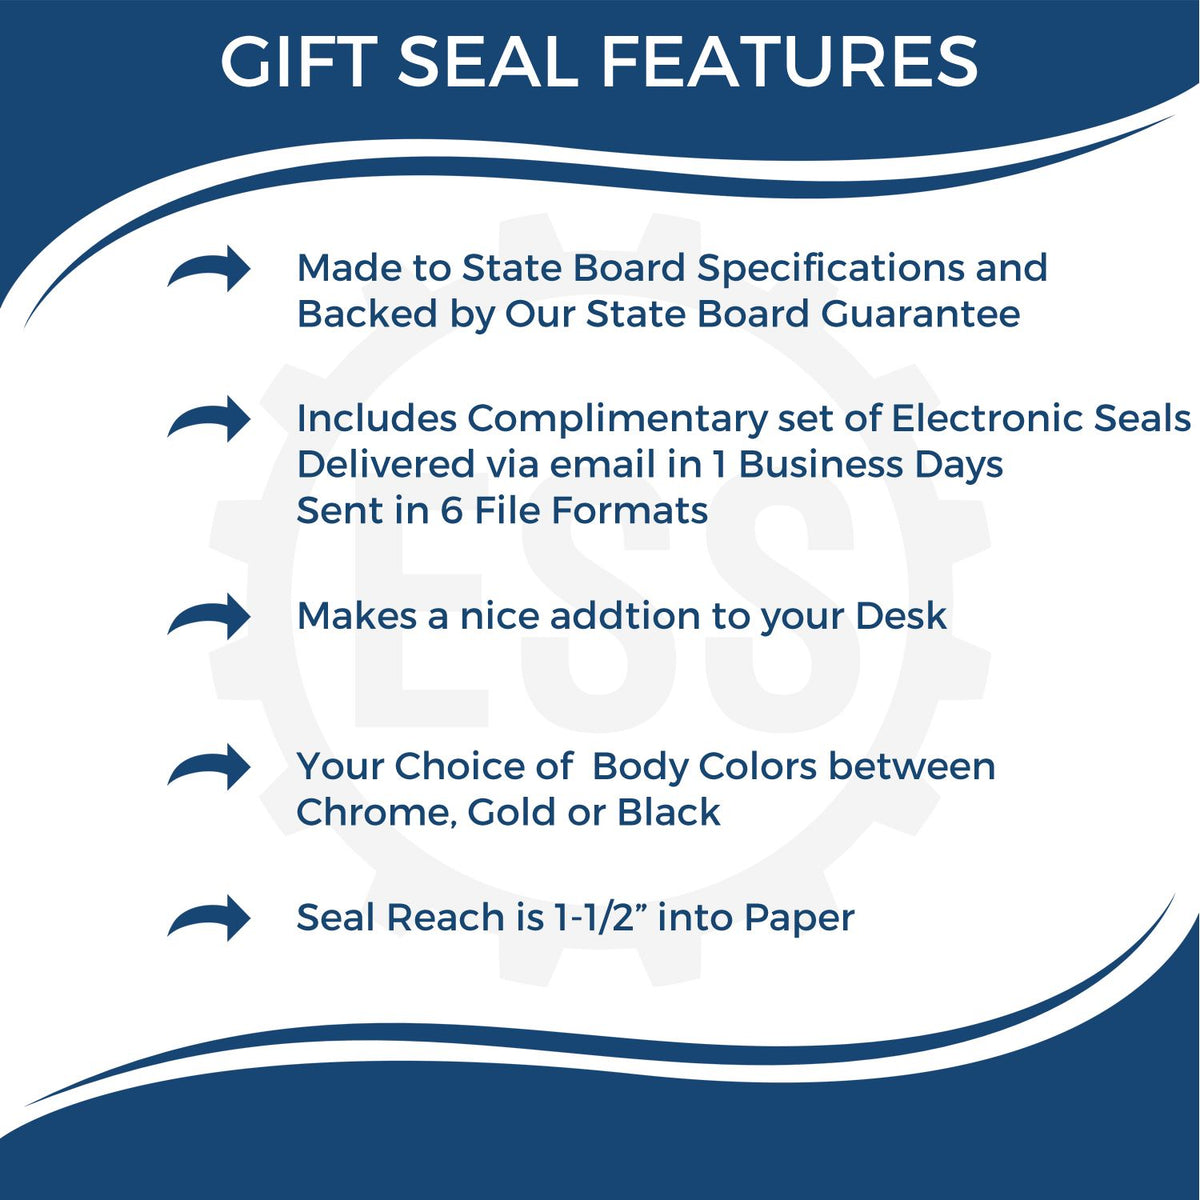 A picture of an infographic highlighting the selling points for the Gift Missouri Engineer Seal